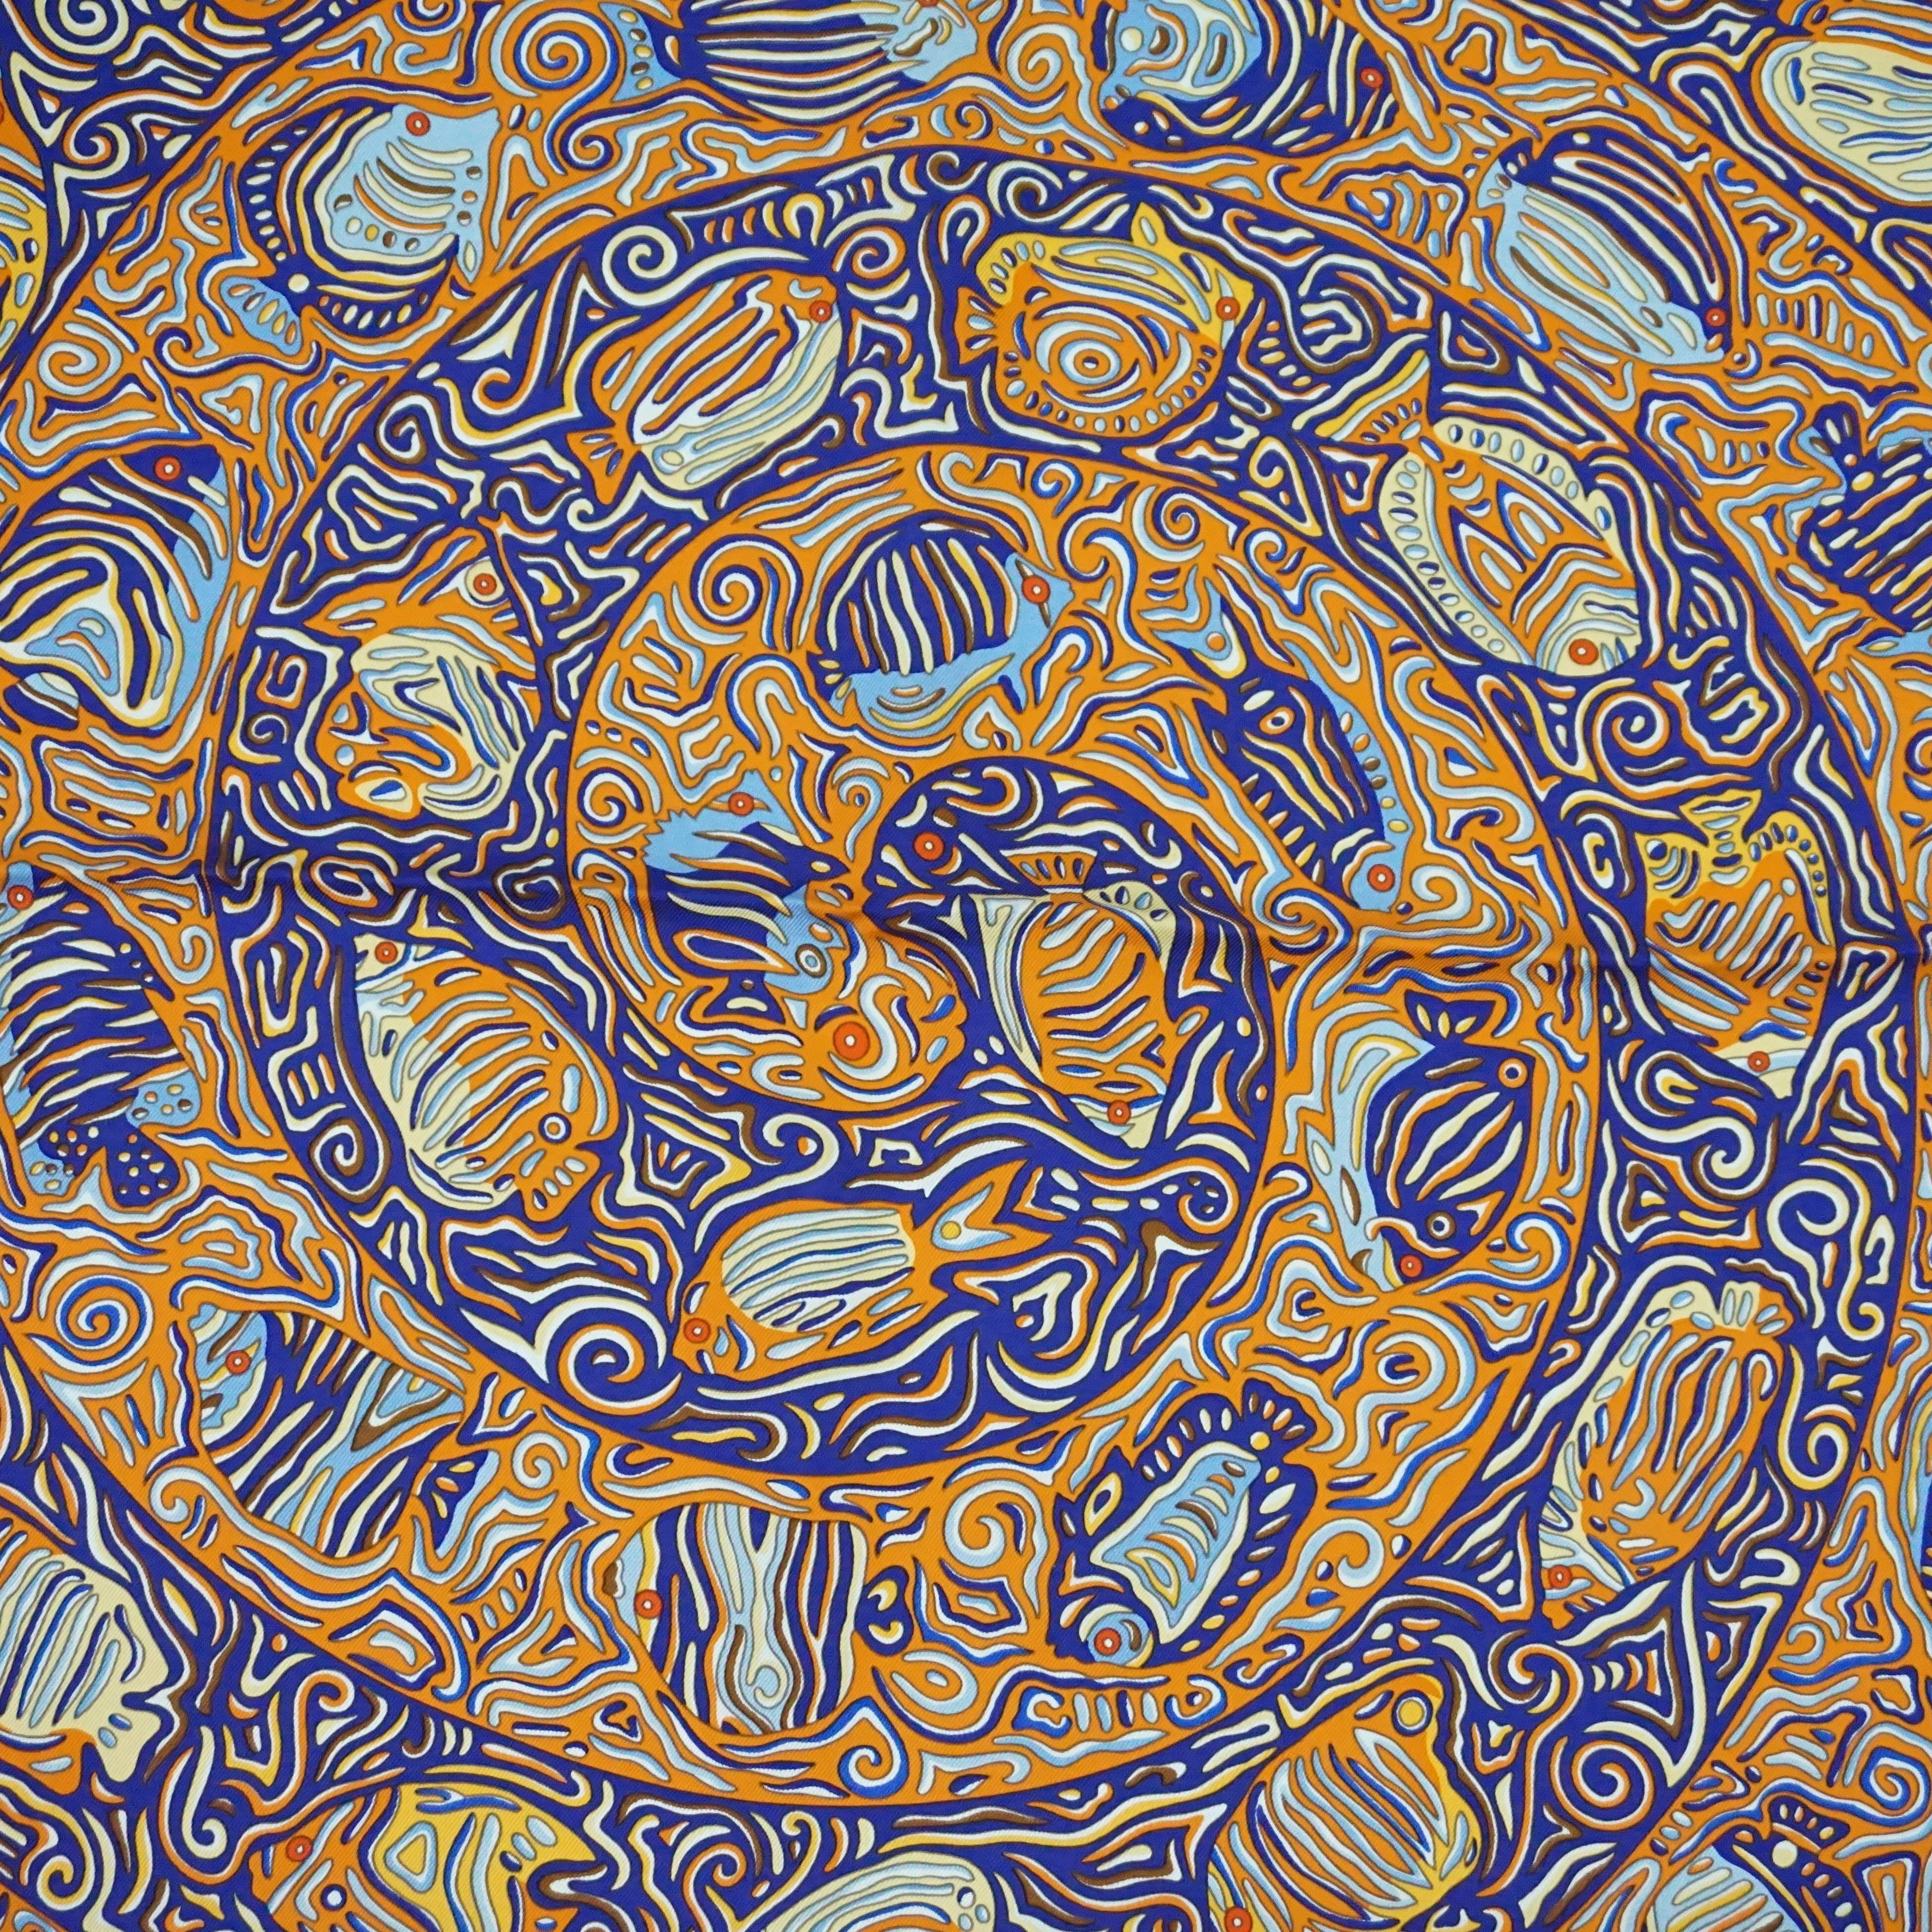 This Hermes silk scarf has an aquatic mosaic theme with different hues of blue, orange, and yellow. It is by Christine Henry and is titled, 